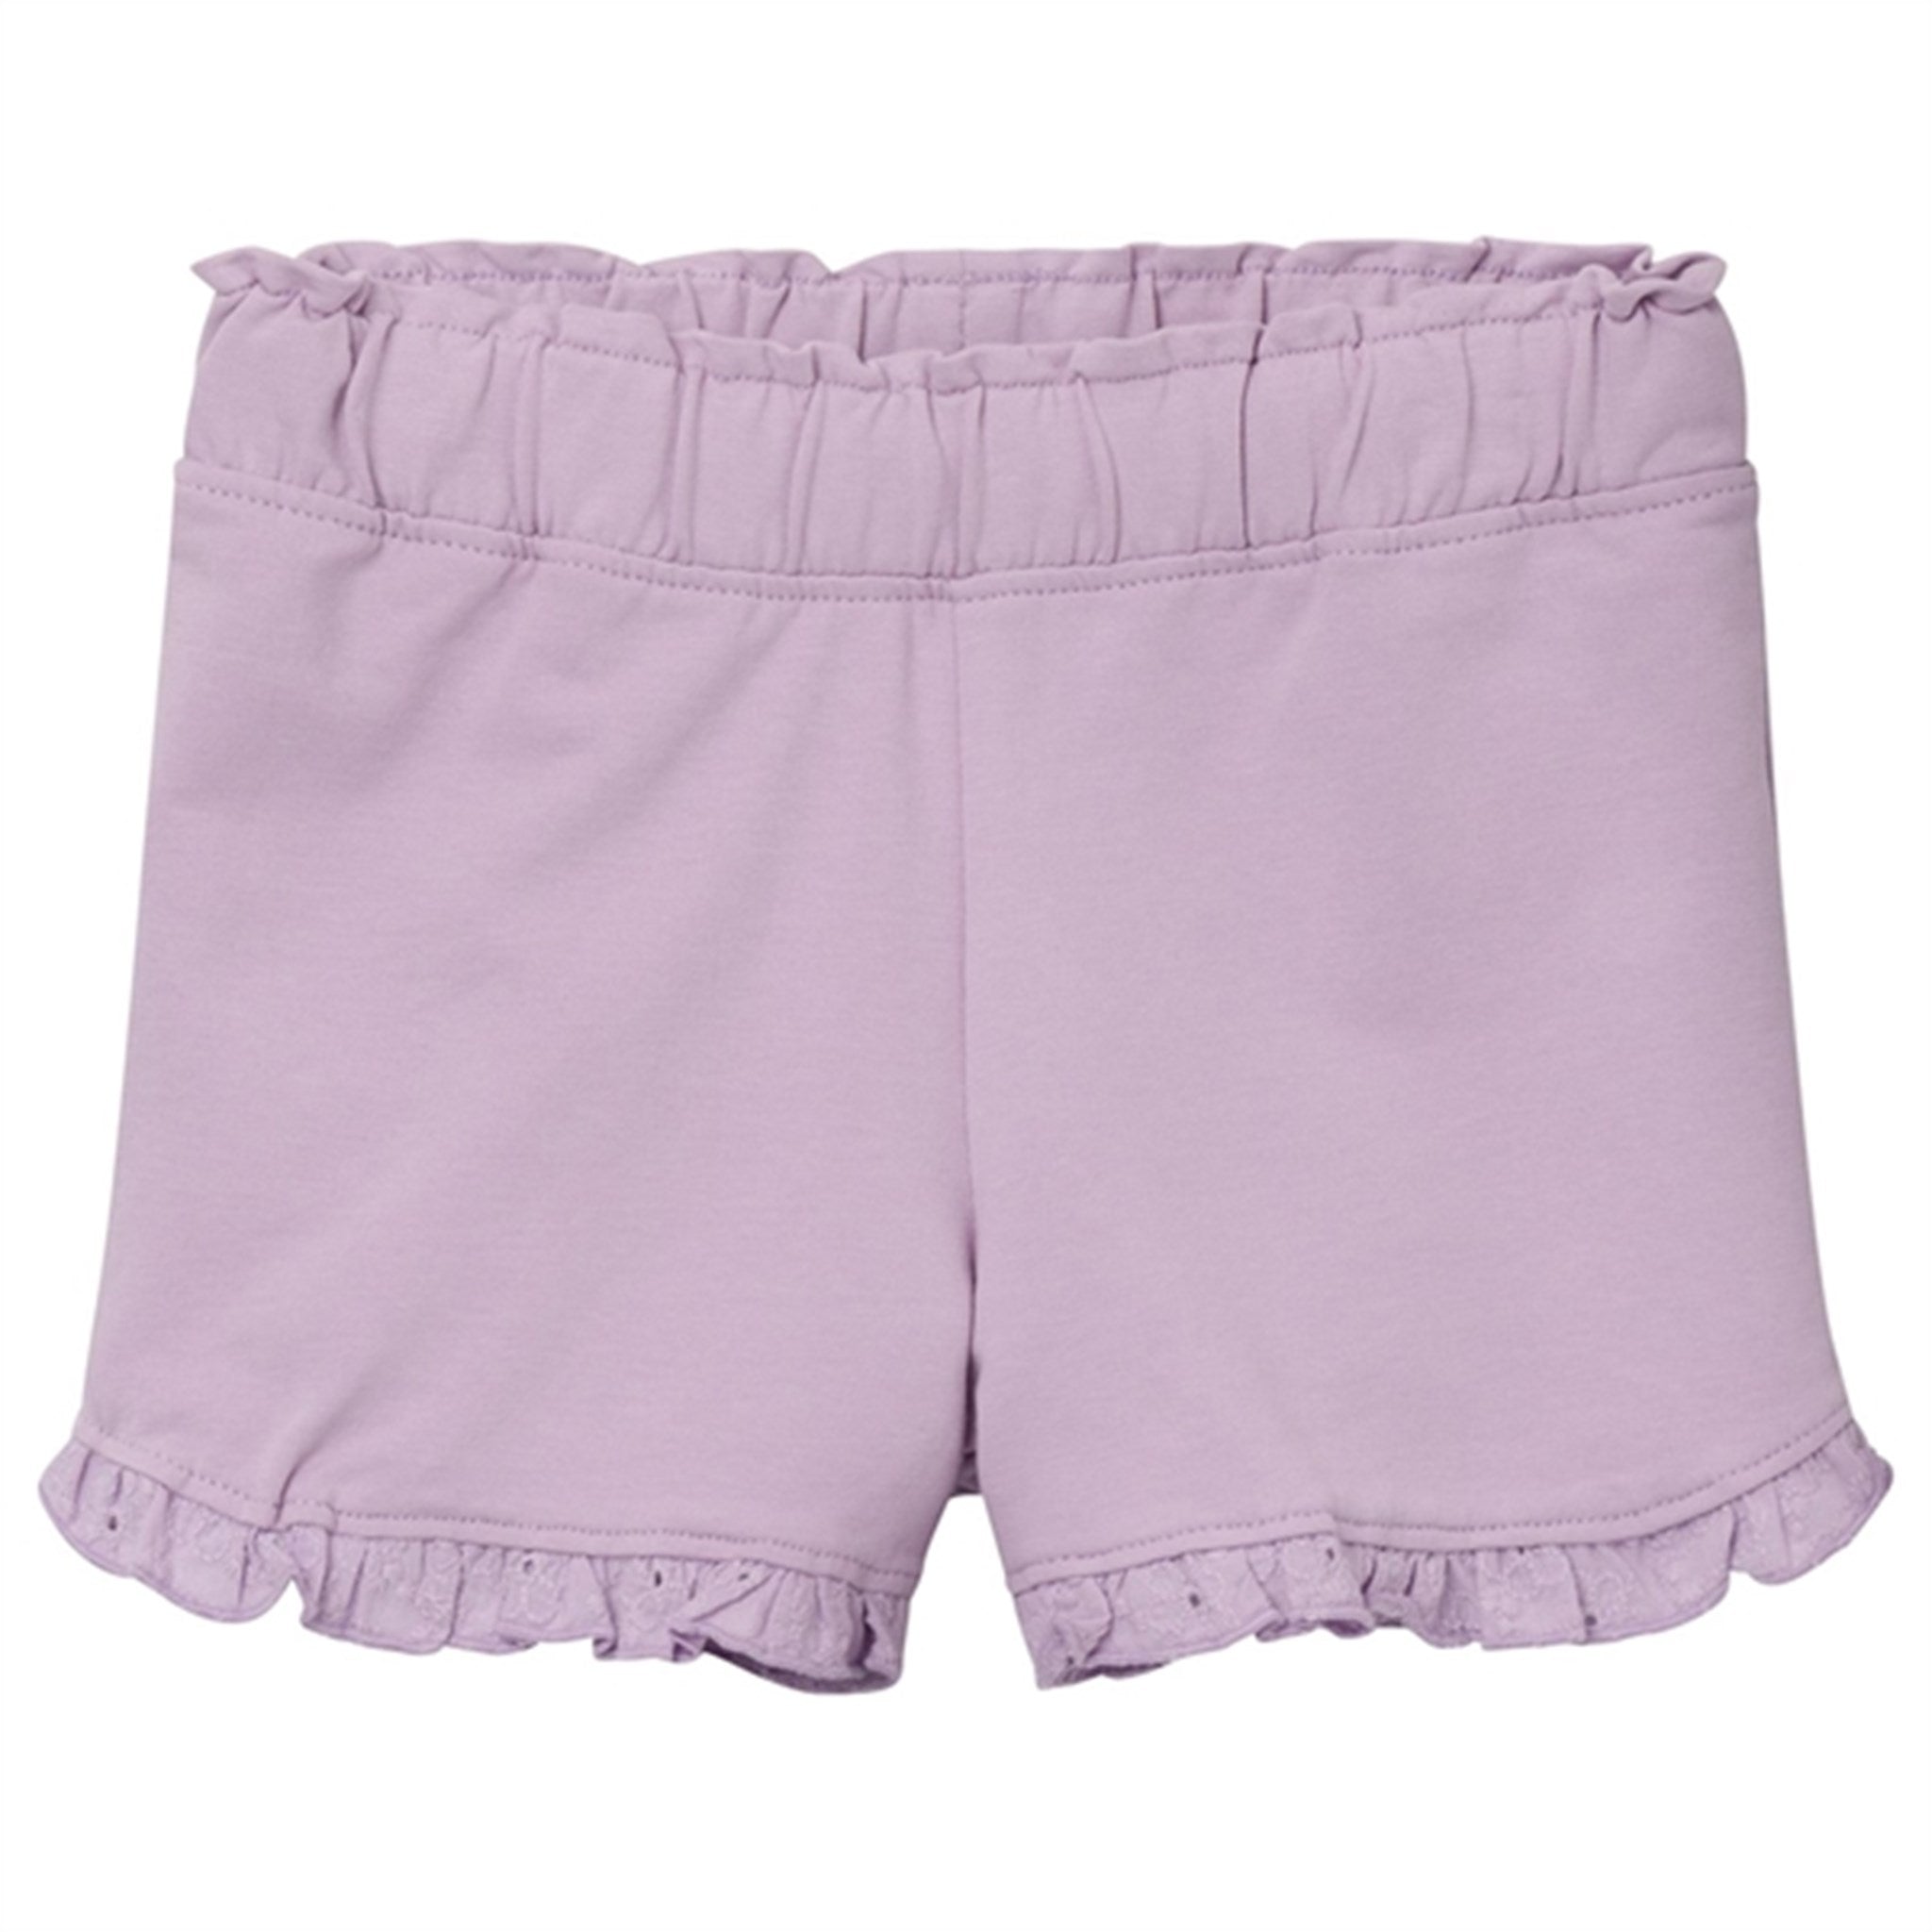 Name it Orchid Bloom Hanna Light Sweat Shorts